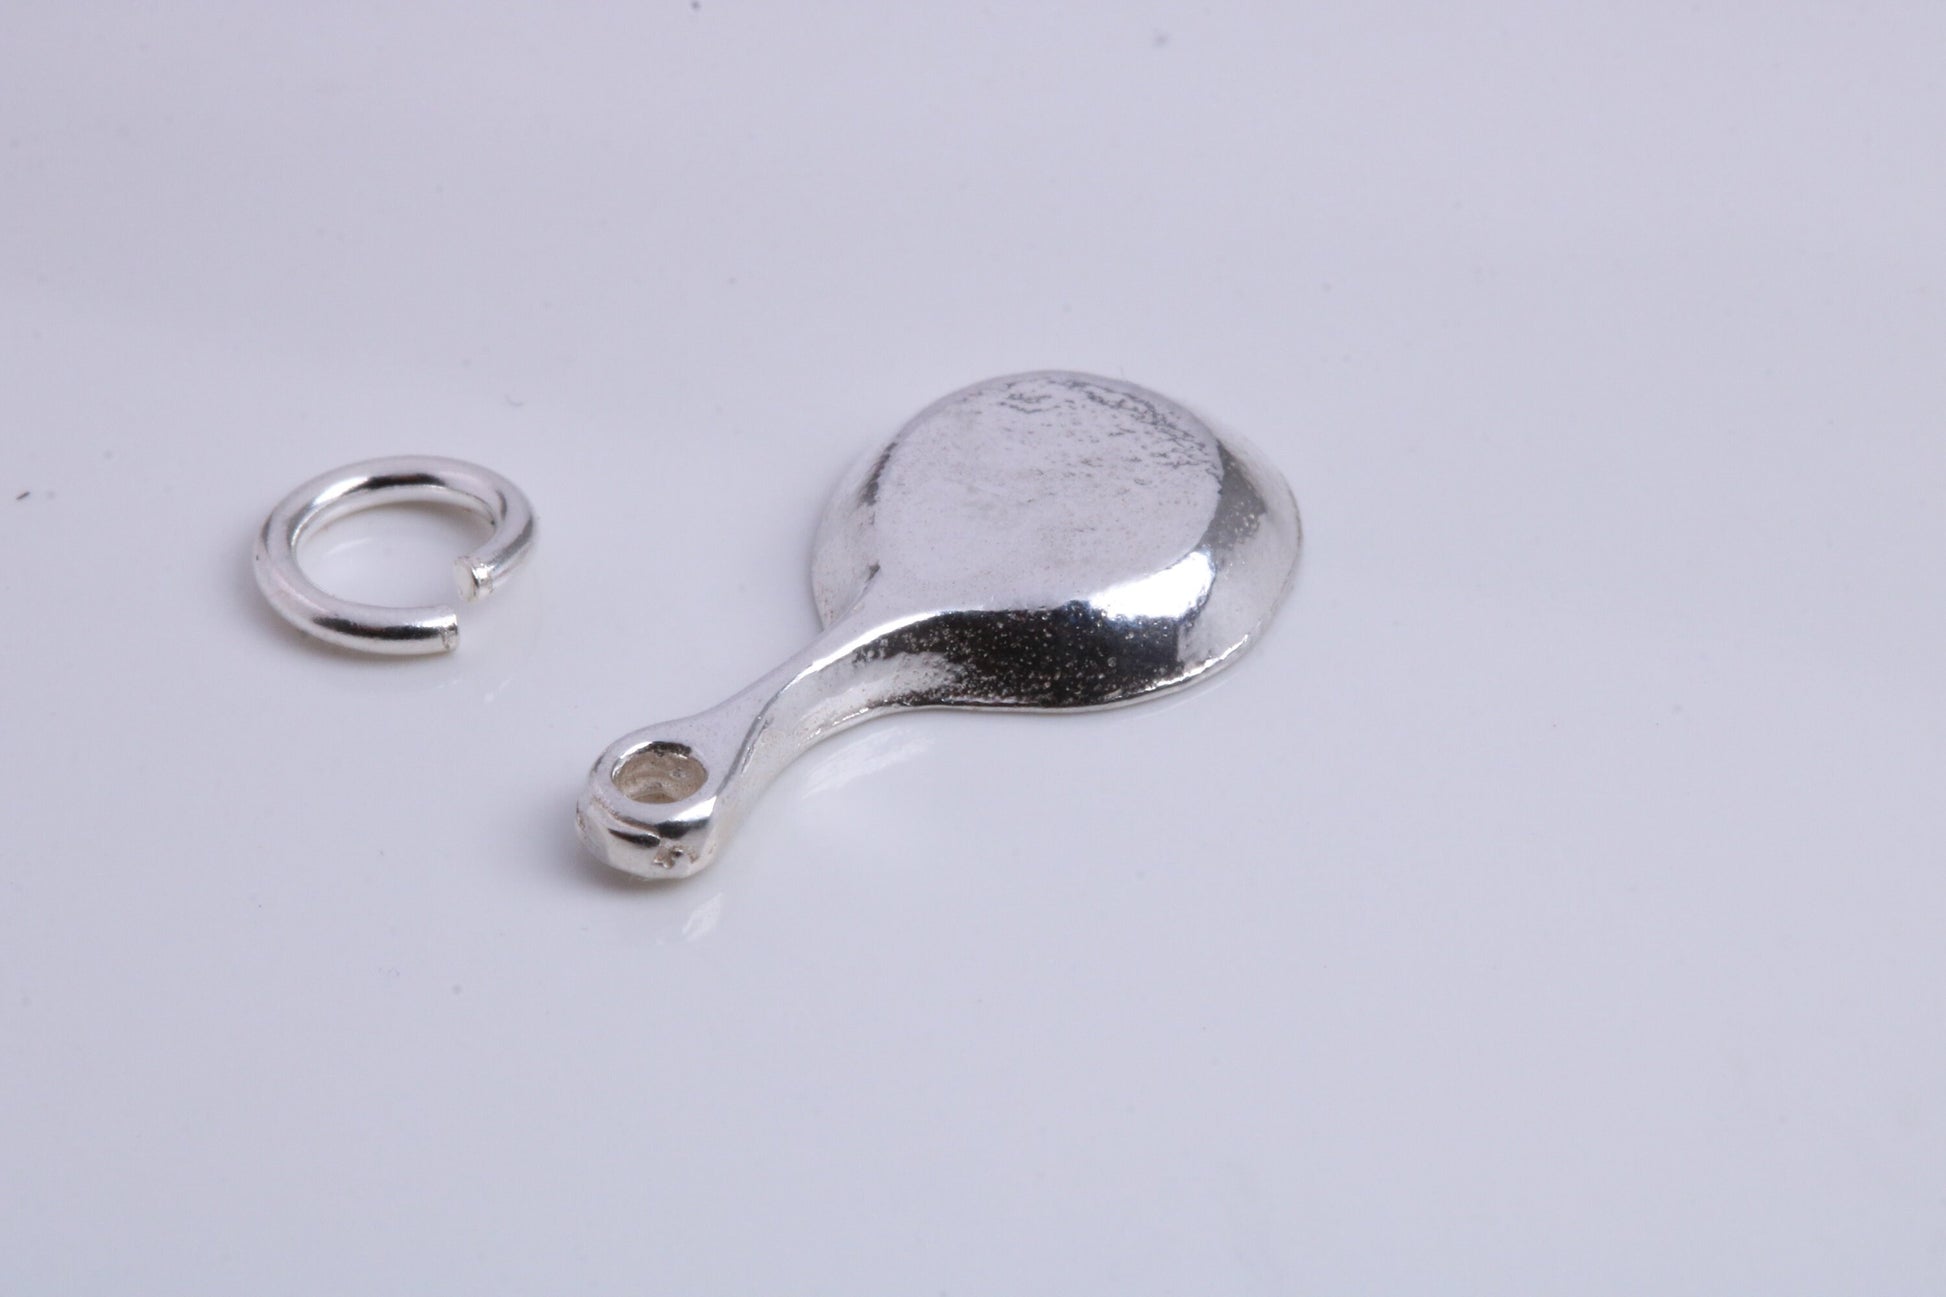 Frying Pan Charm, Traditional Charm, Made from Solid 925 Grade Sterling Silver, Complete with Attachment Link